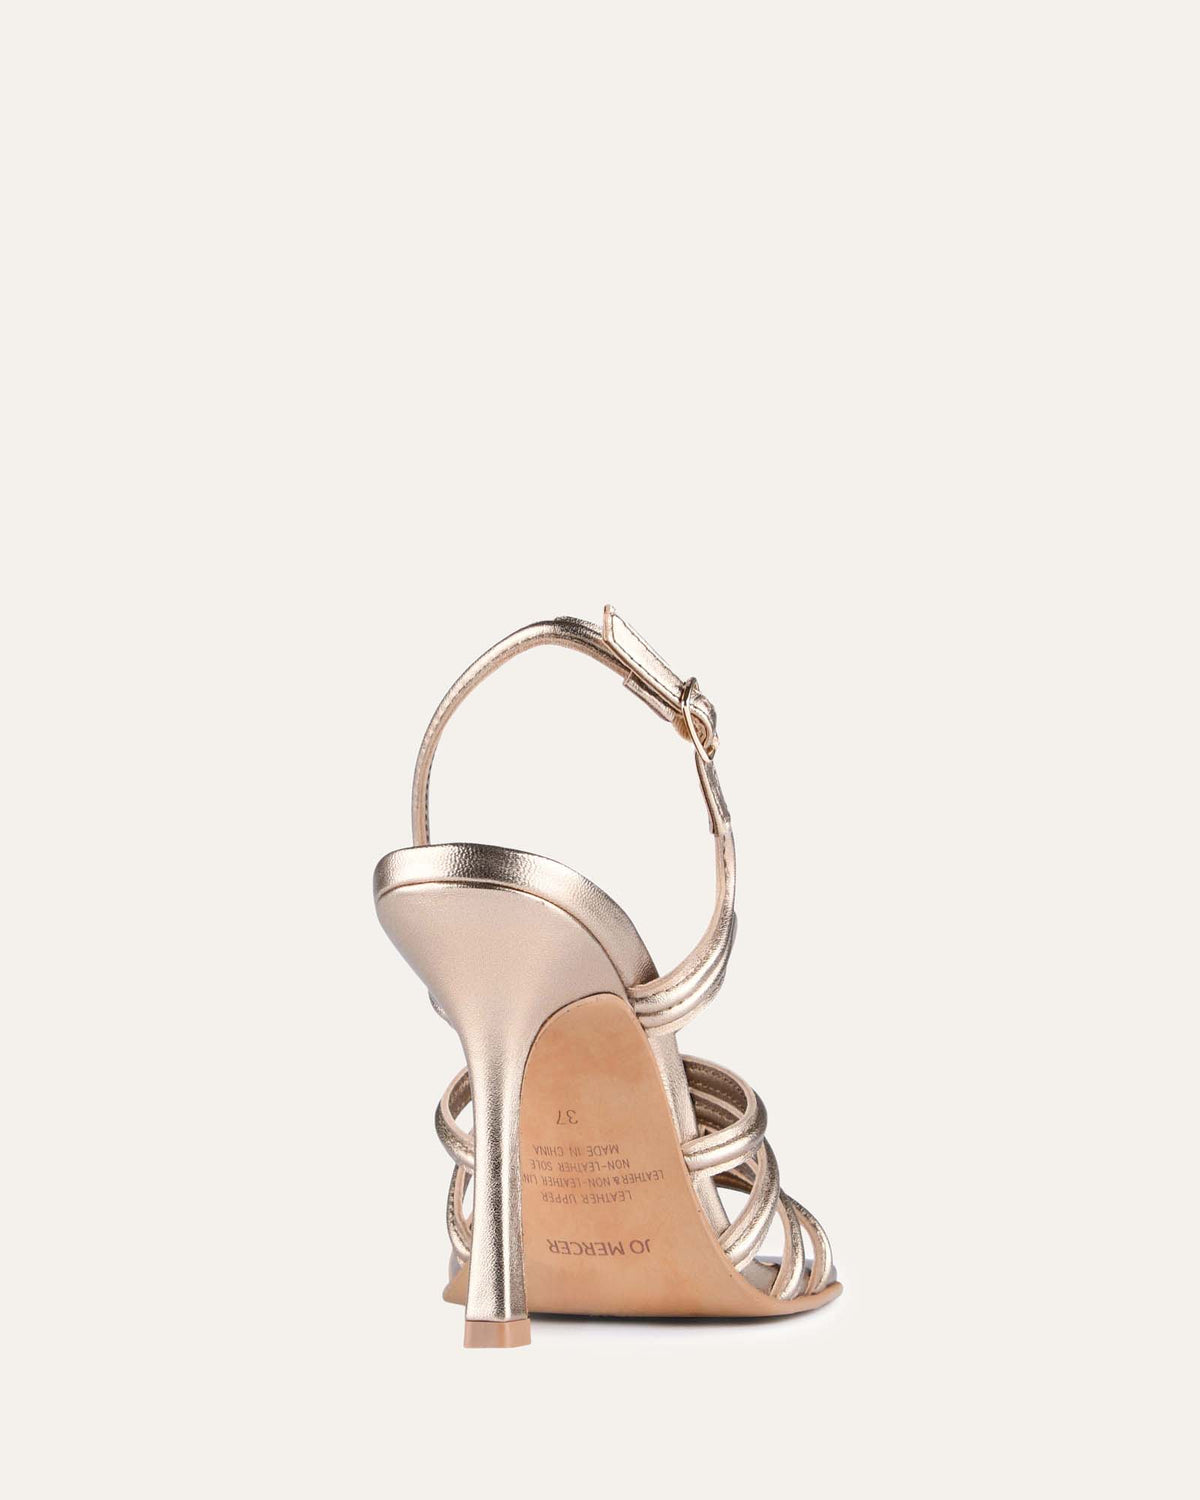 LIBBY HIGH HEEL SANDALS SOFT GOLD LEATHER